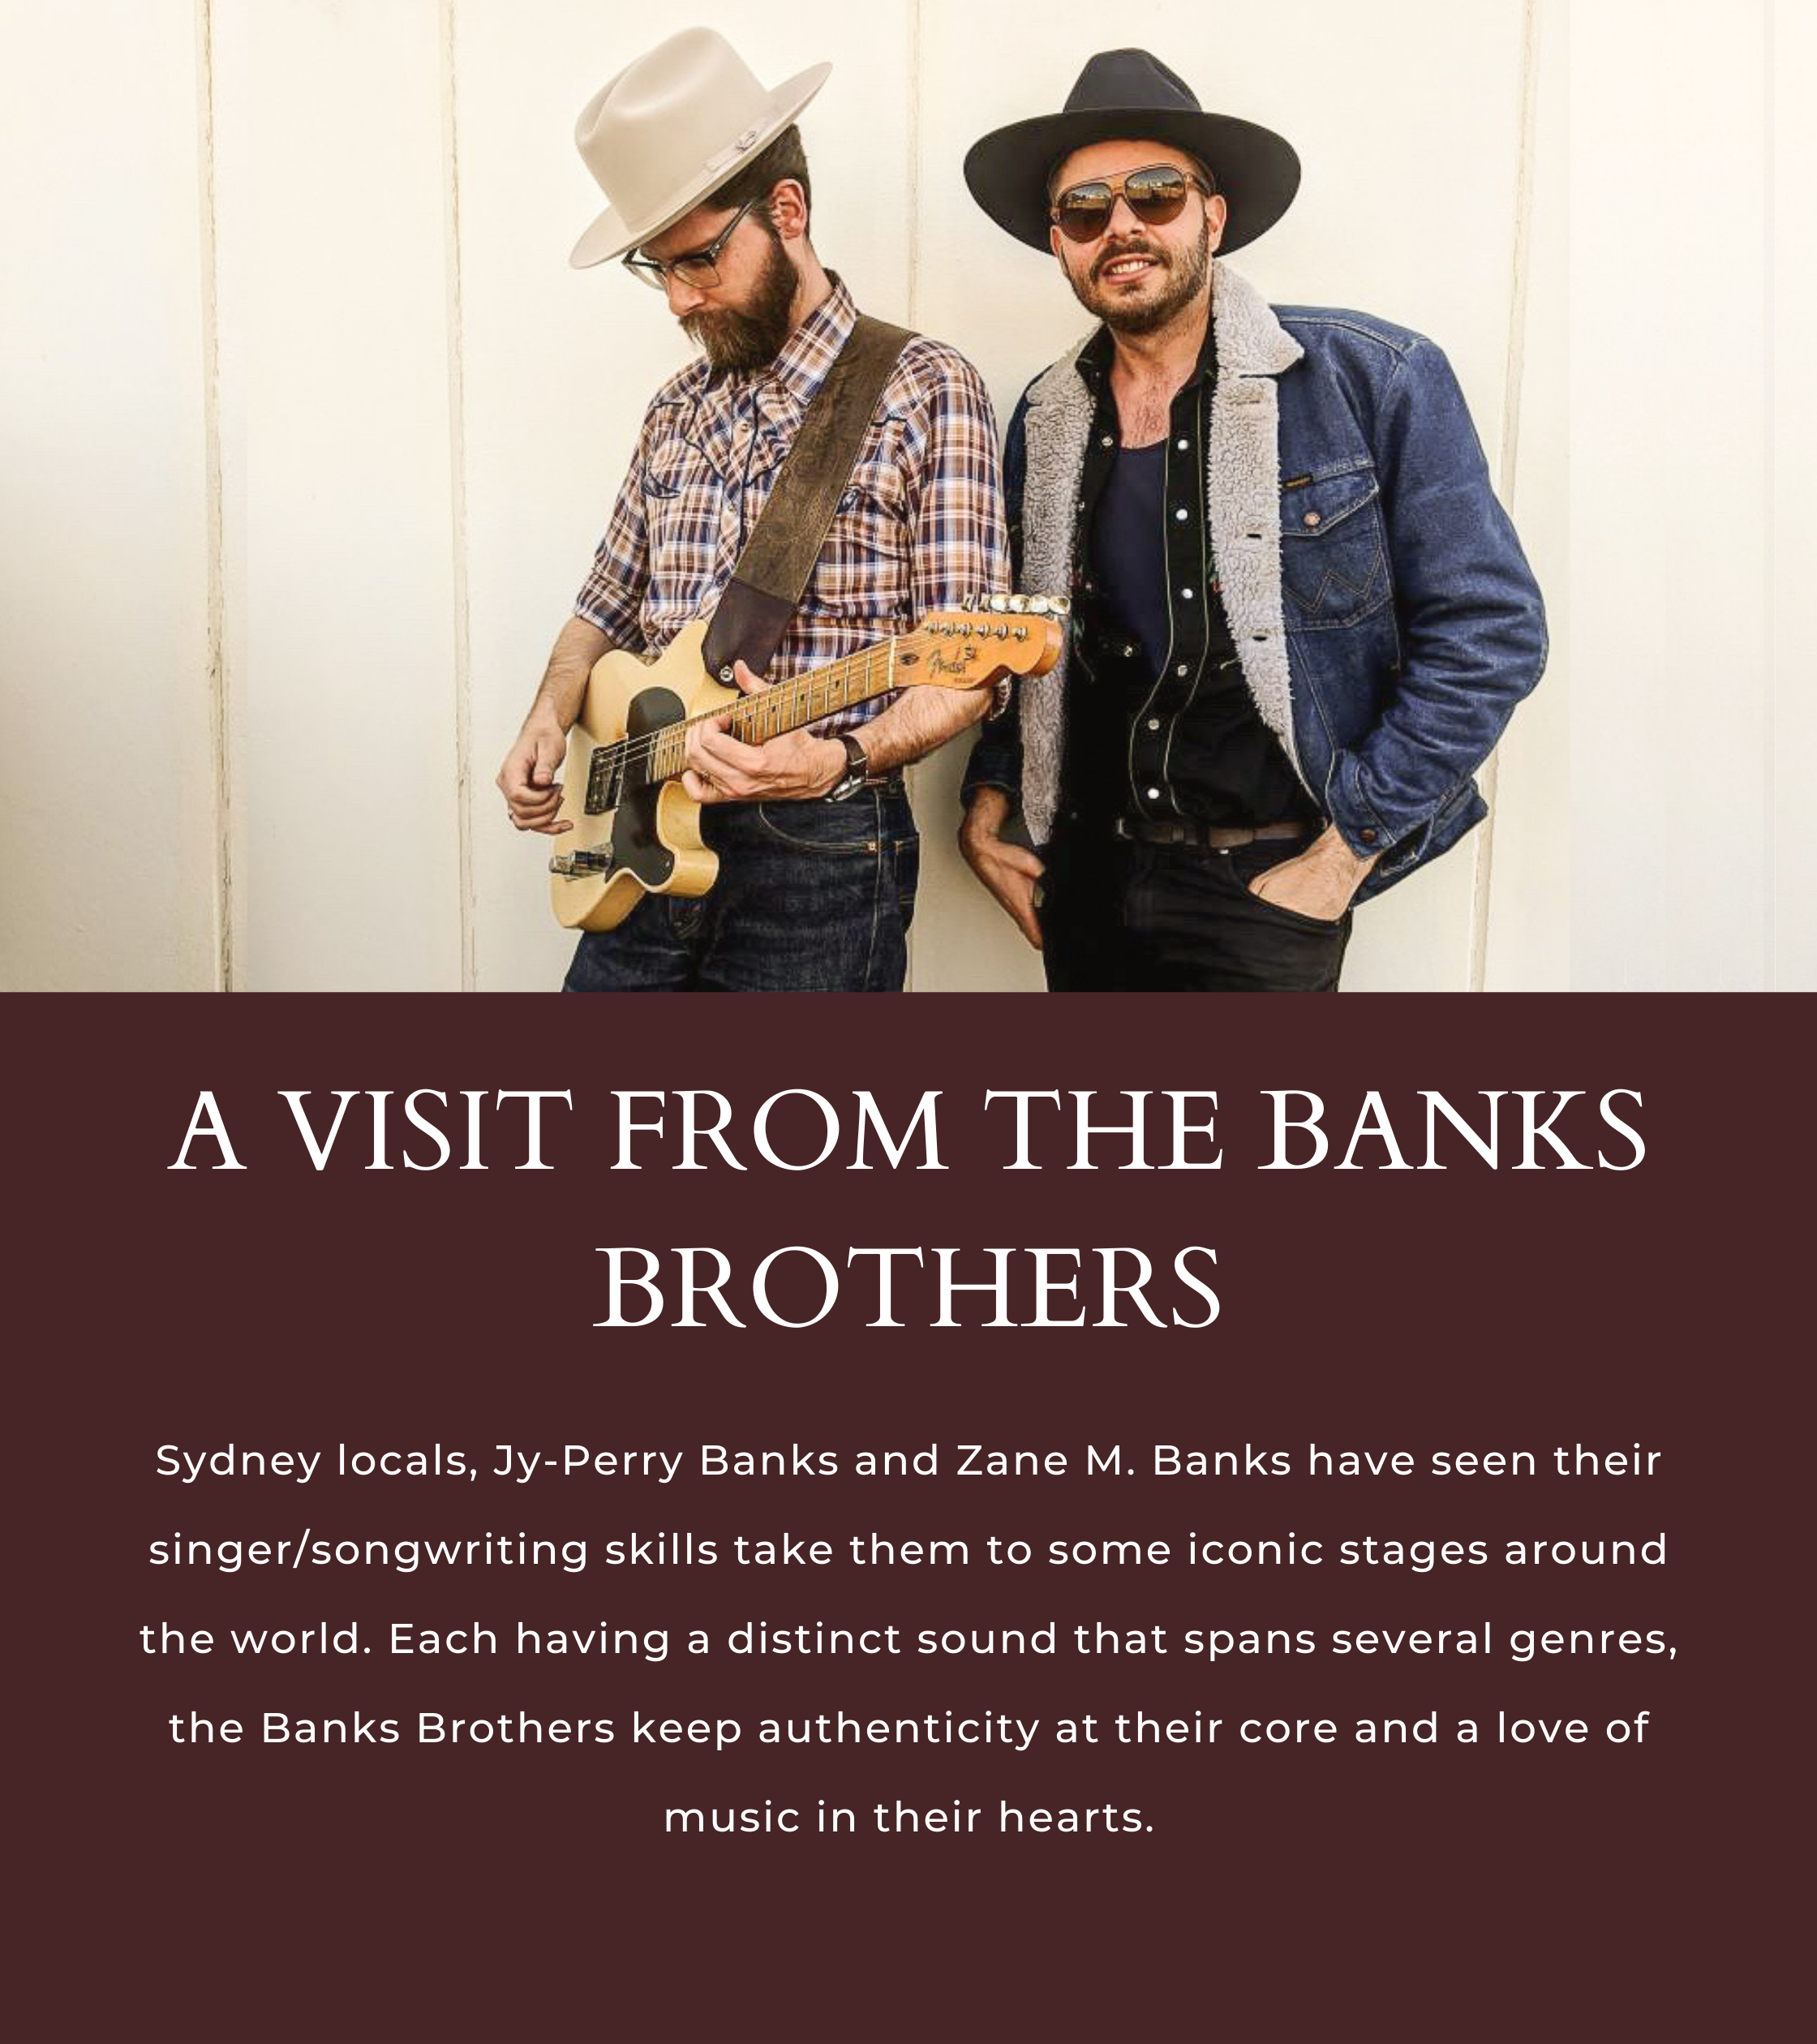 Stetson Australia hats - the Banks Brothers Story